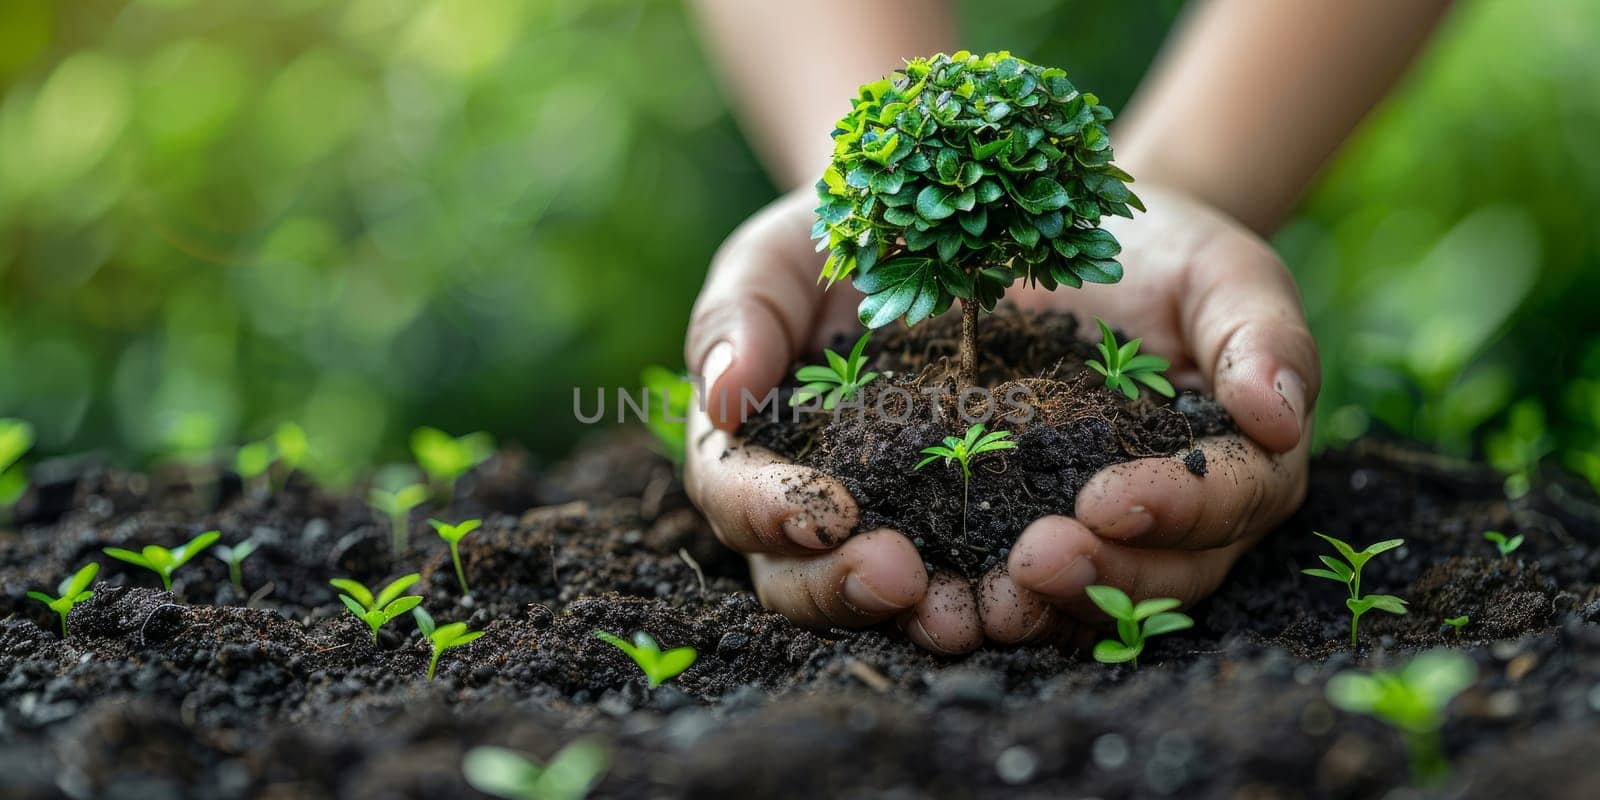 Hands nurturing young plant seedling in fertile soil. Concept of environmental conservation, sustainable gardening, and eco friendly living. by ailike